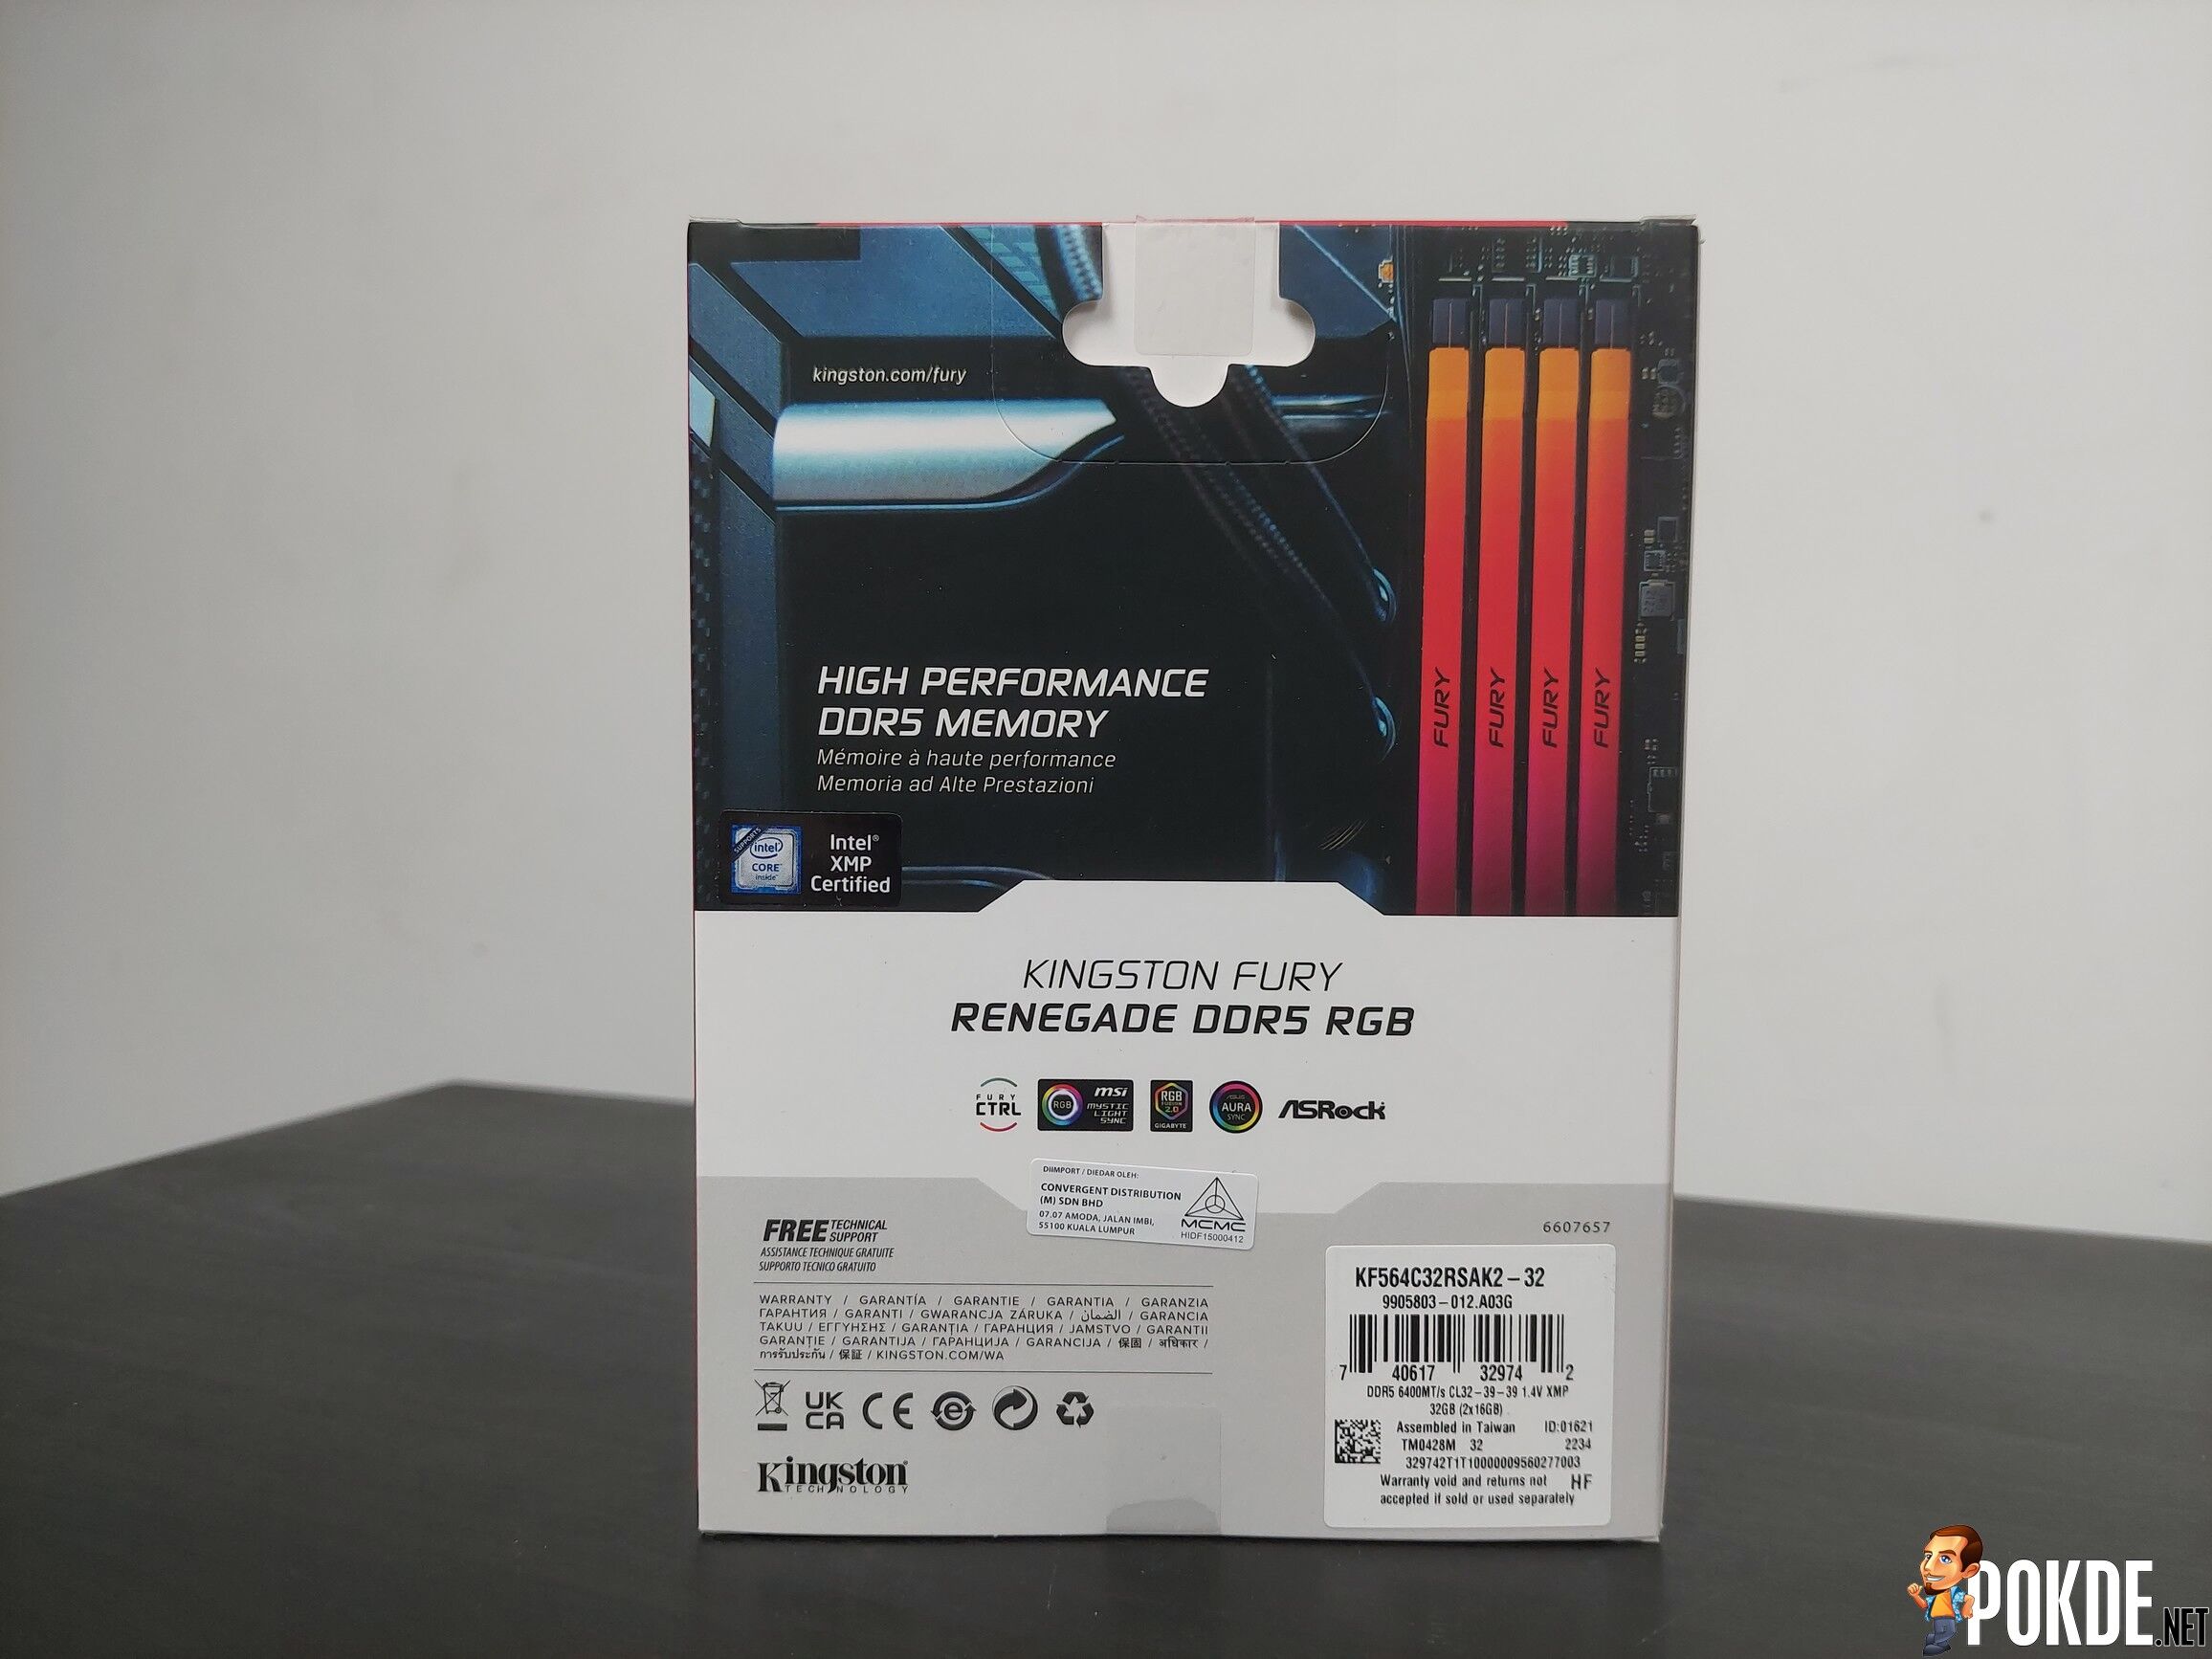 Kingston FURY RENEGADE DDR5 RGB (DDR5-6400 CL32) Review - To RGB Or Not To RGB? 23